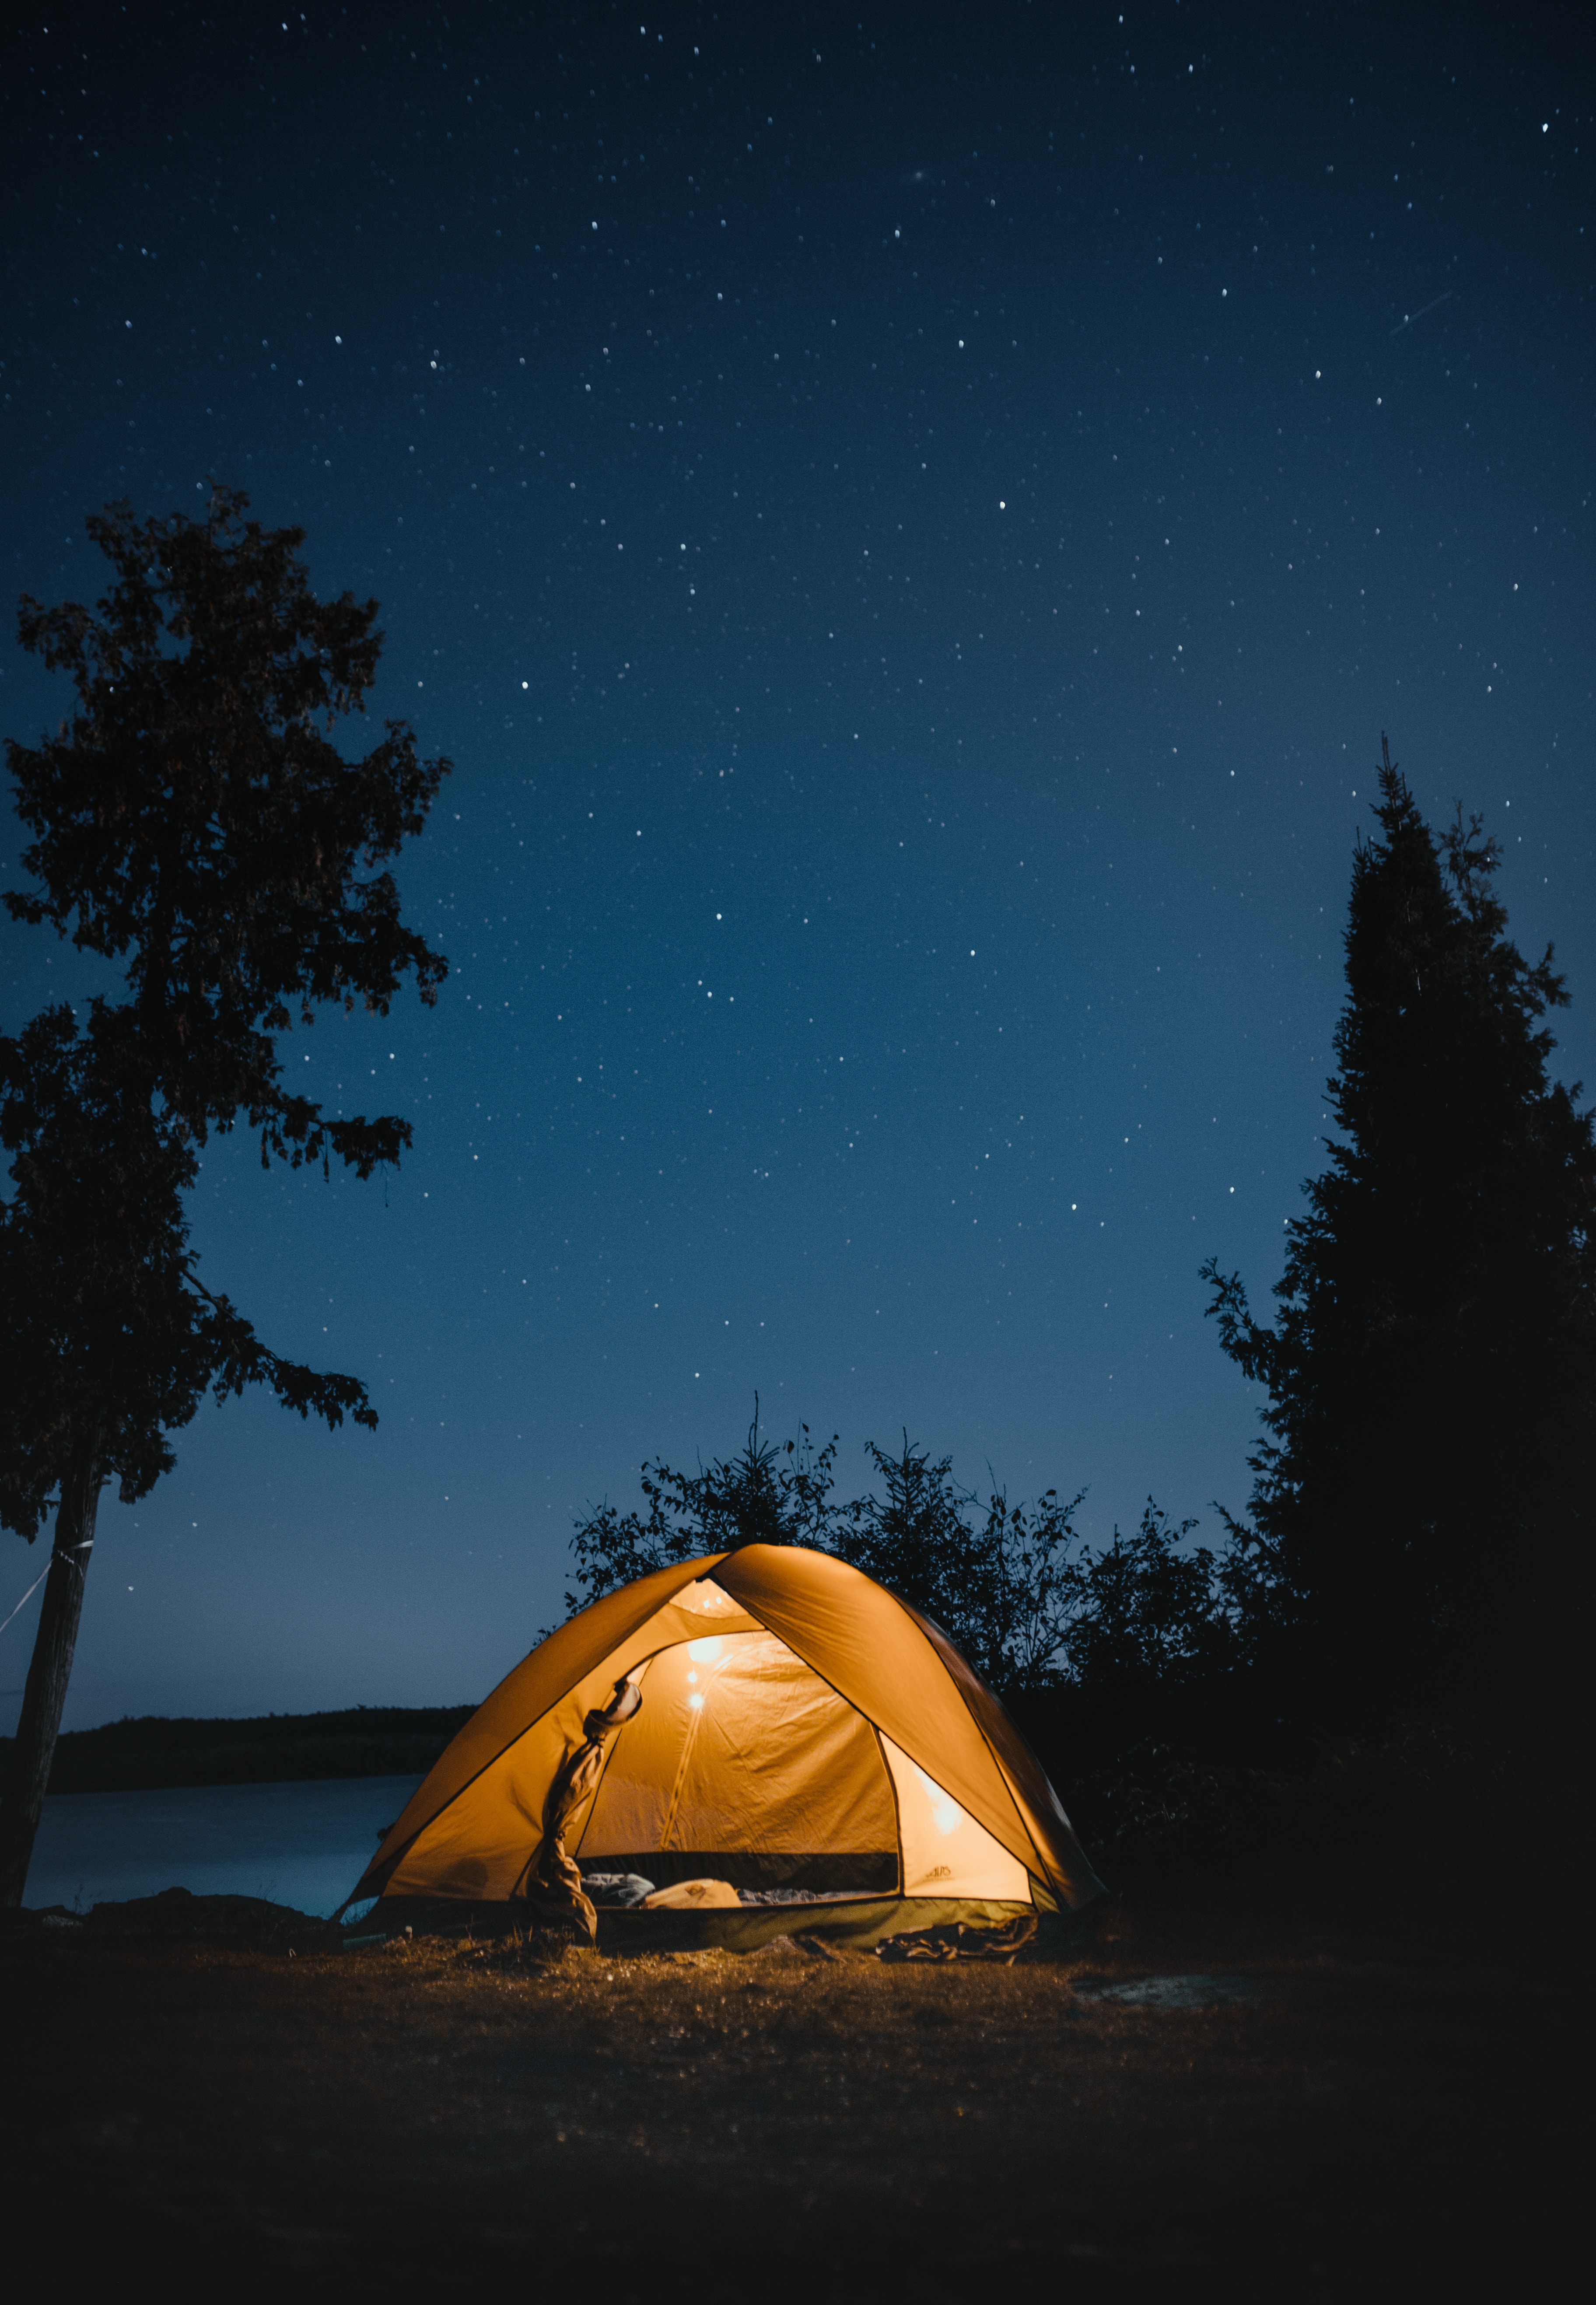 tent, nature, camping, campsite, starry sky, night, journey